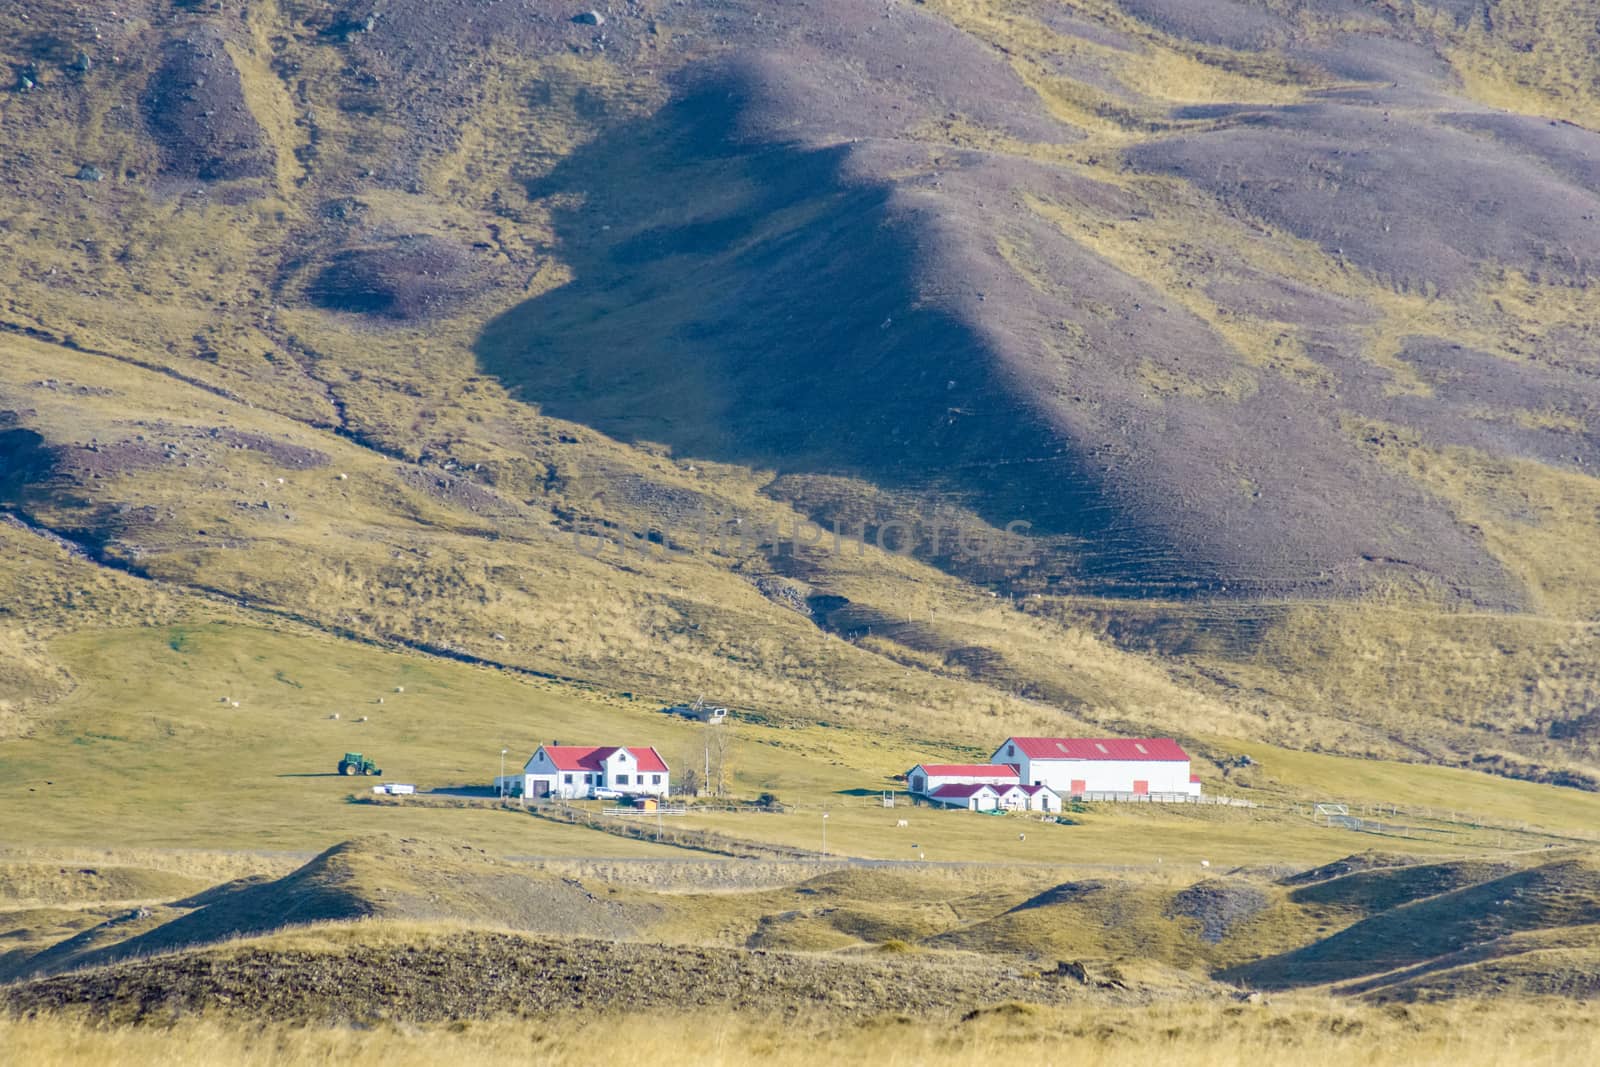 Northern Iceland farm based at the foot of a mountain slope during sunny weather by MXW_Stock